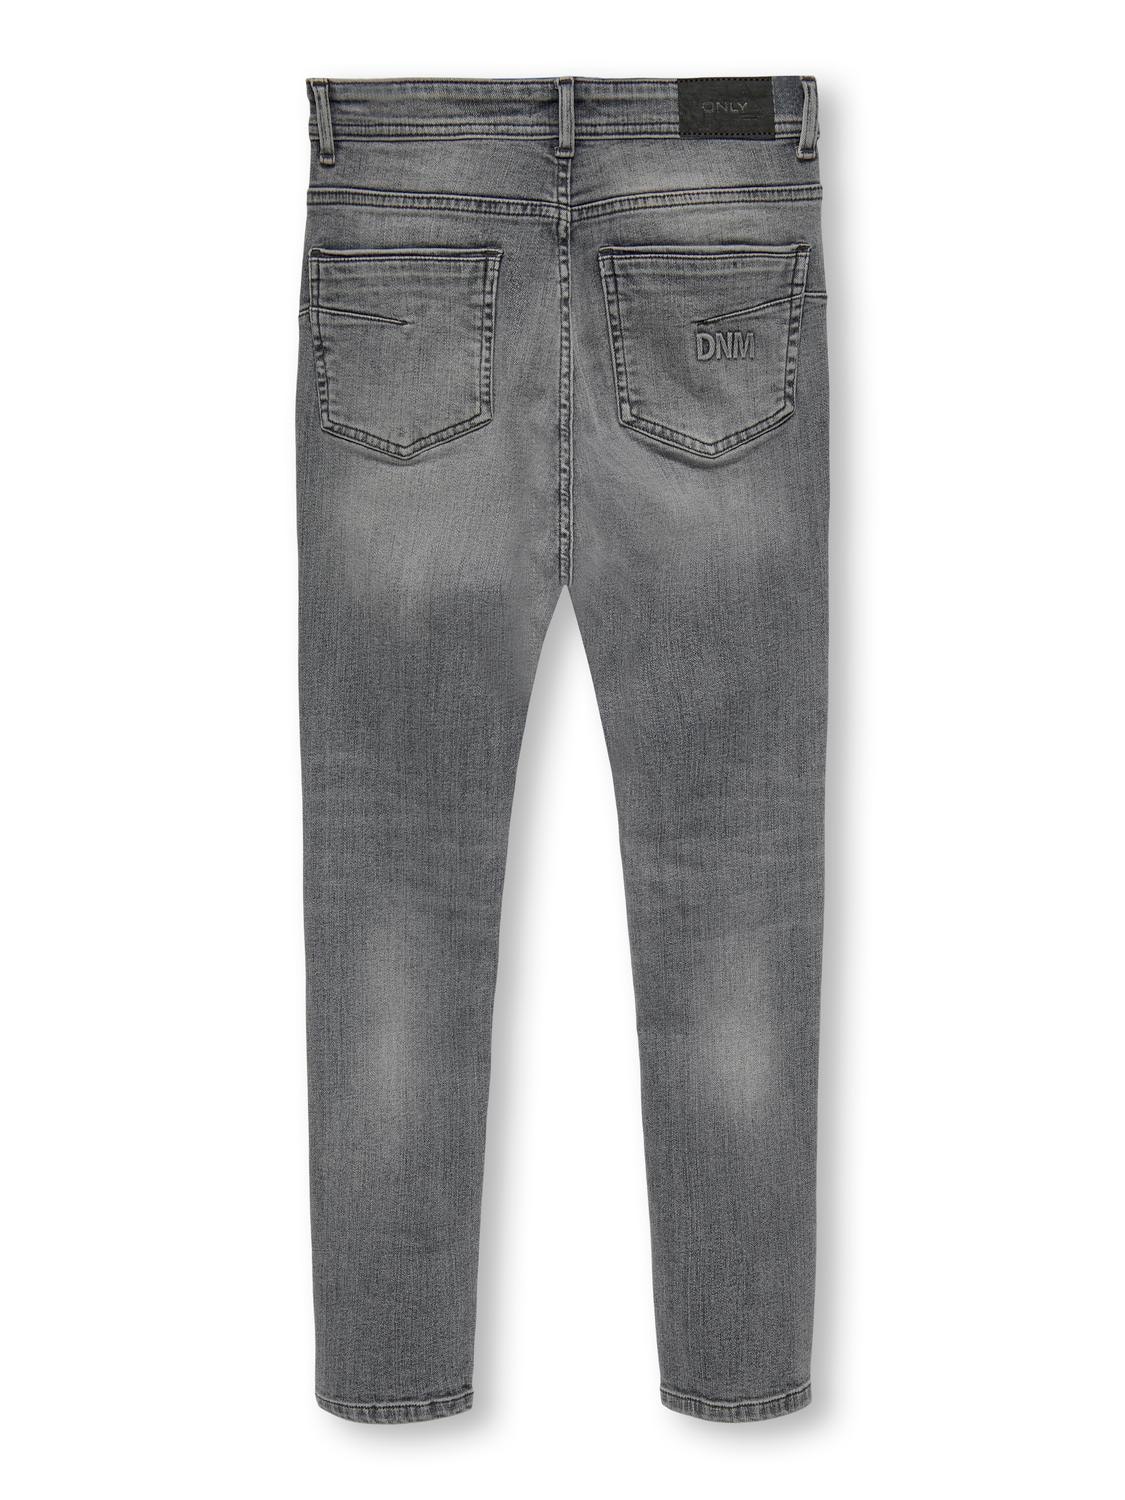 ONLY Jeans Skinny Fit Taille moyenne -Grey Denim - 15309838